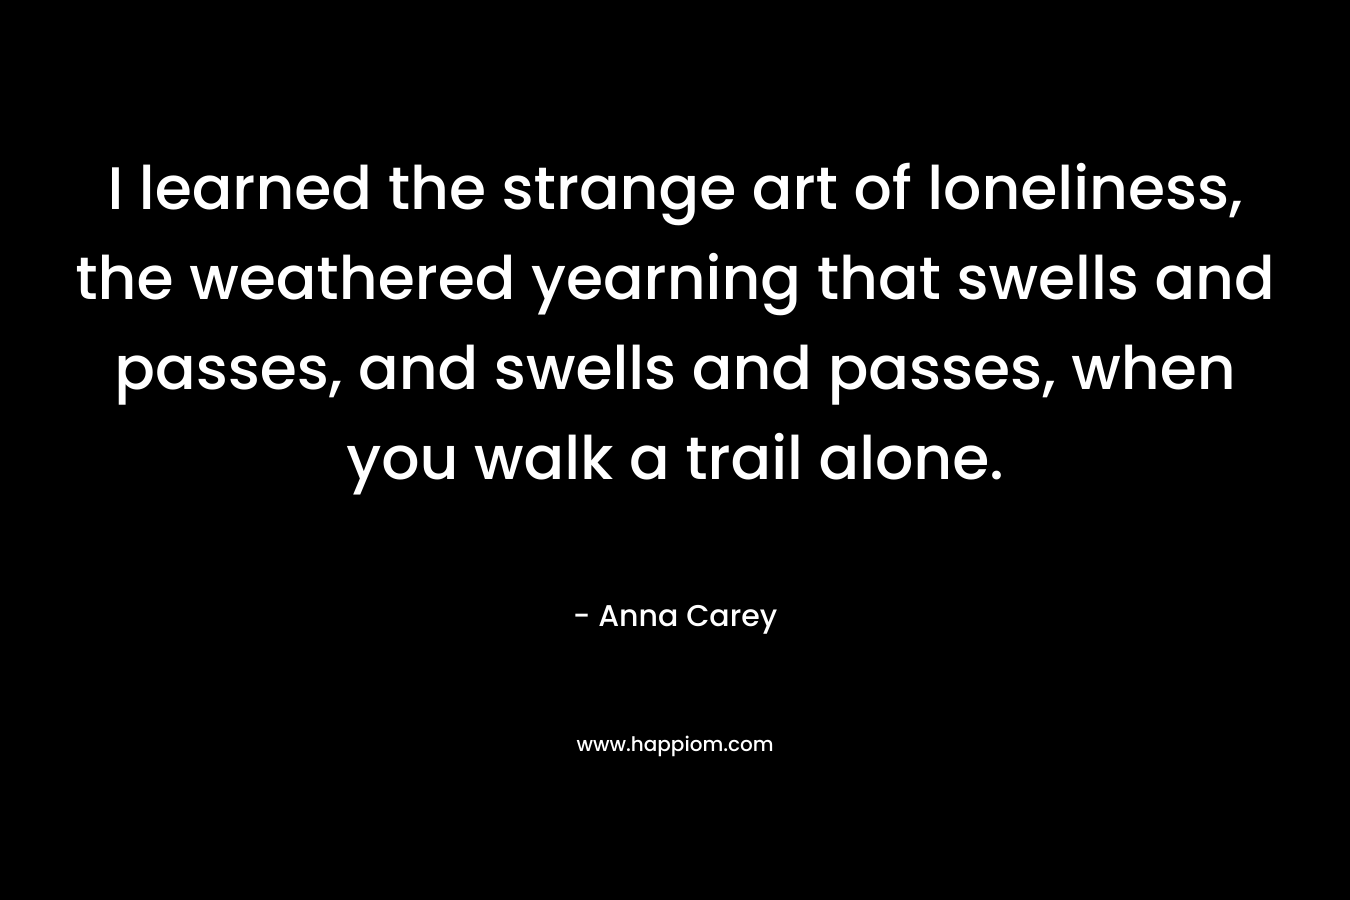 I learned the strange art of loneliness, the weathered yearning that swells and passes, and swells and passes, when you walk a trail alone. – Anna Carey